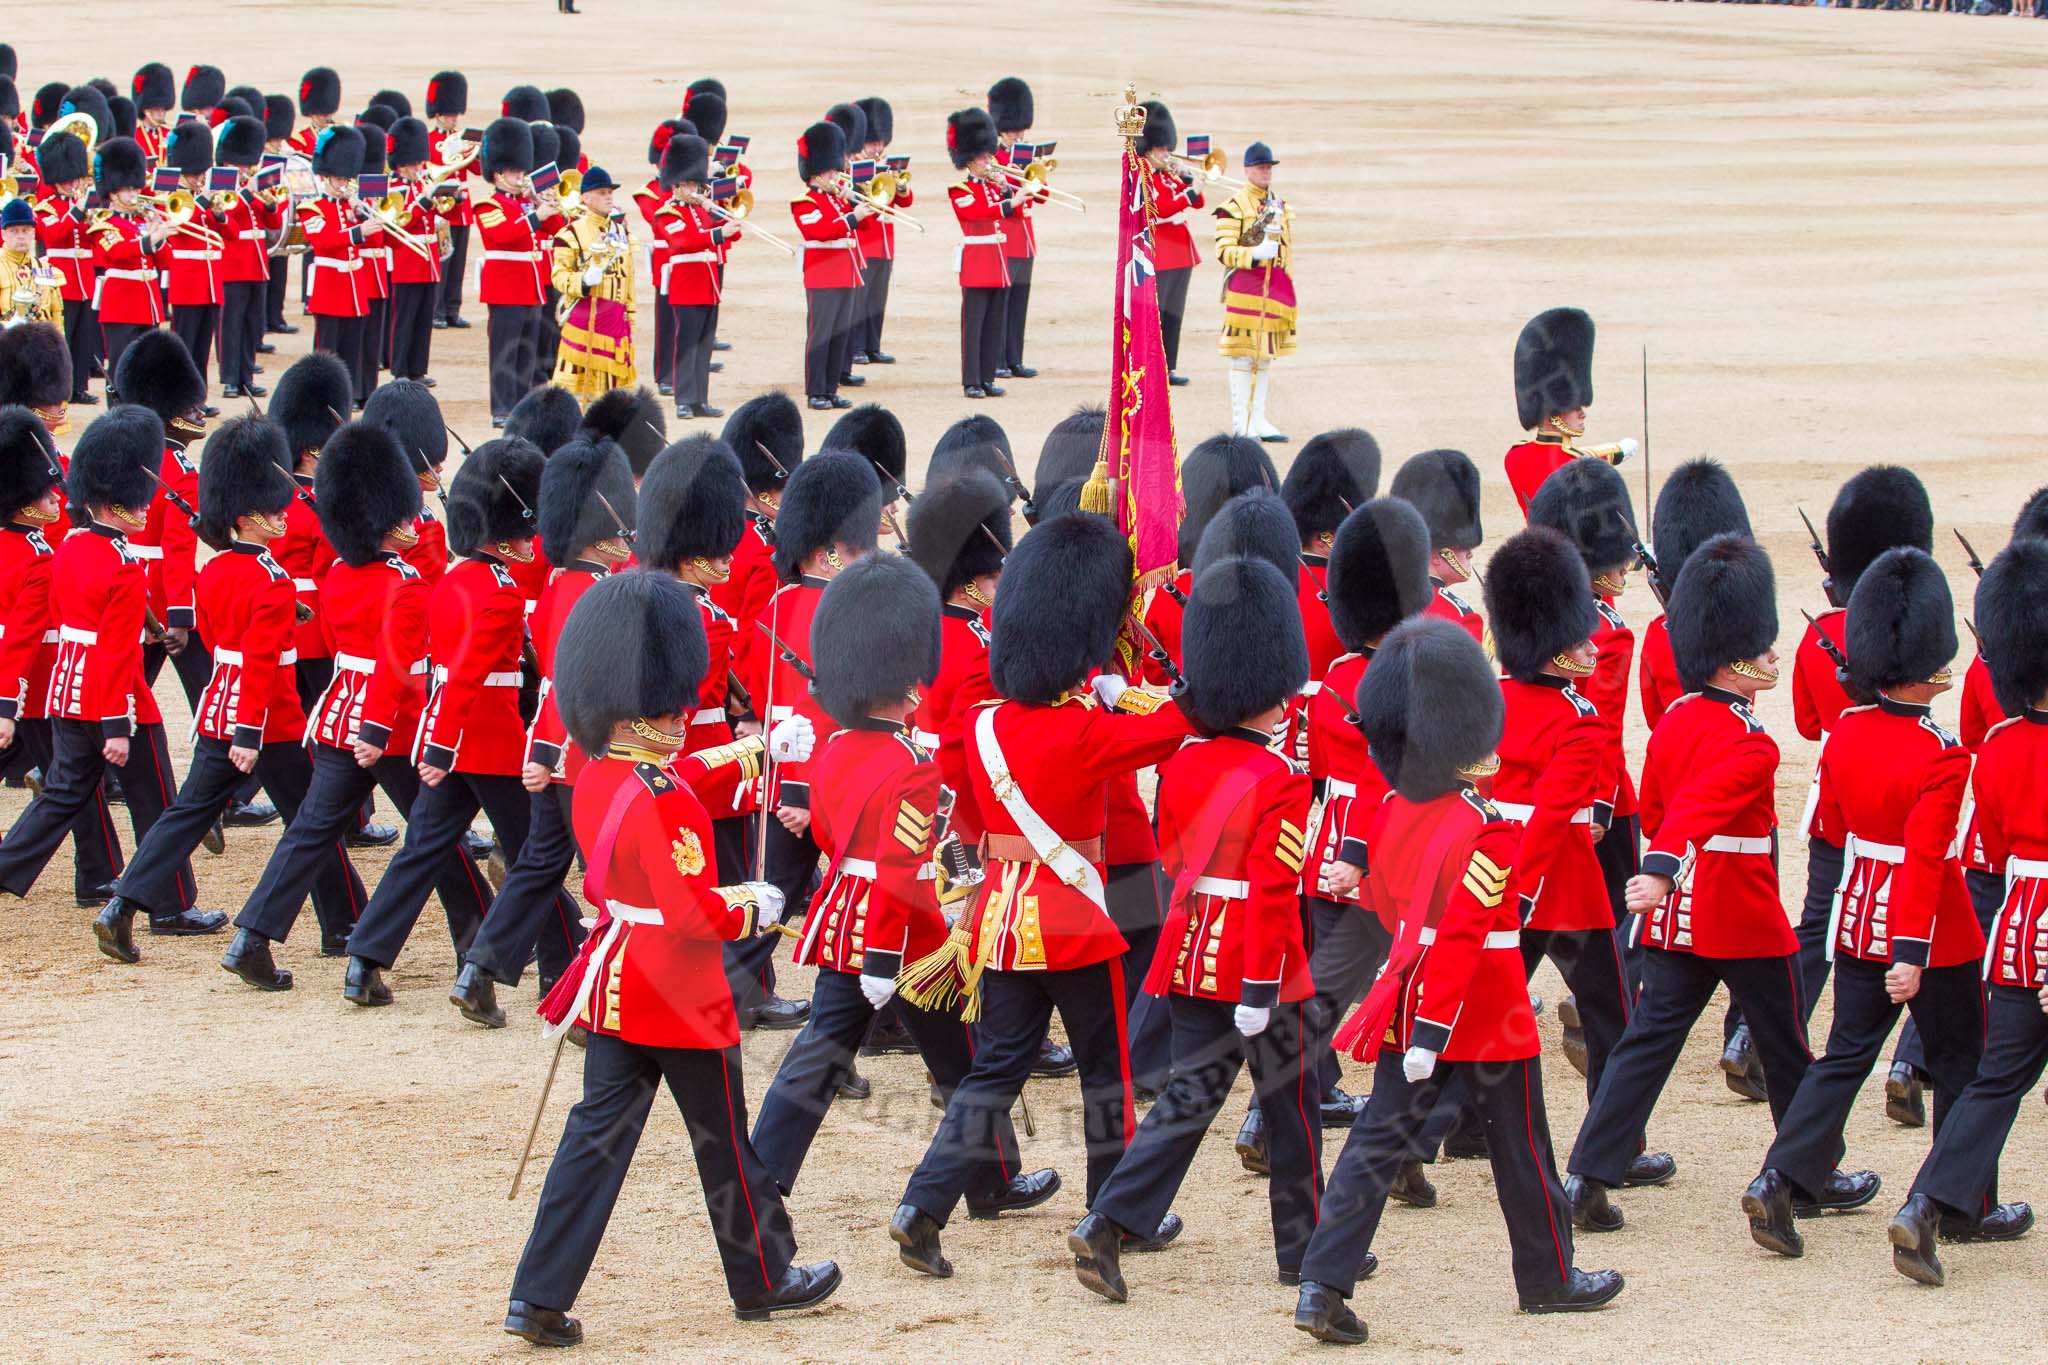 Trooping the Colour 2014.
Horse Guards Parade, Westminster,
London SW1A,

United Kingdom,
on 14 June 2014 at 11:47, image #689